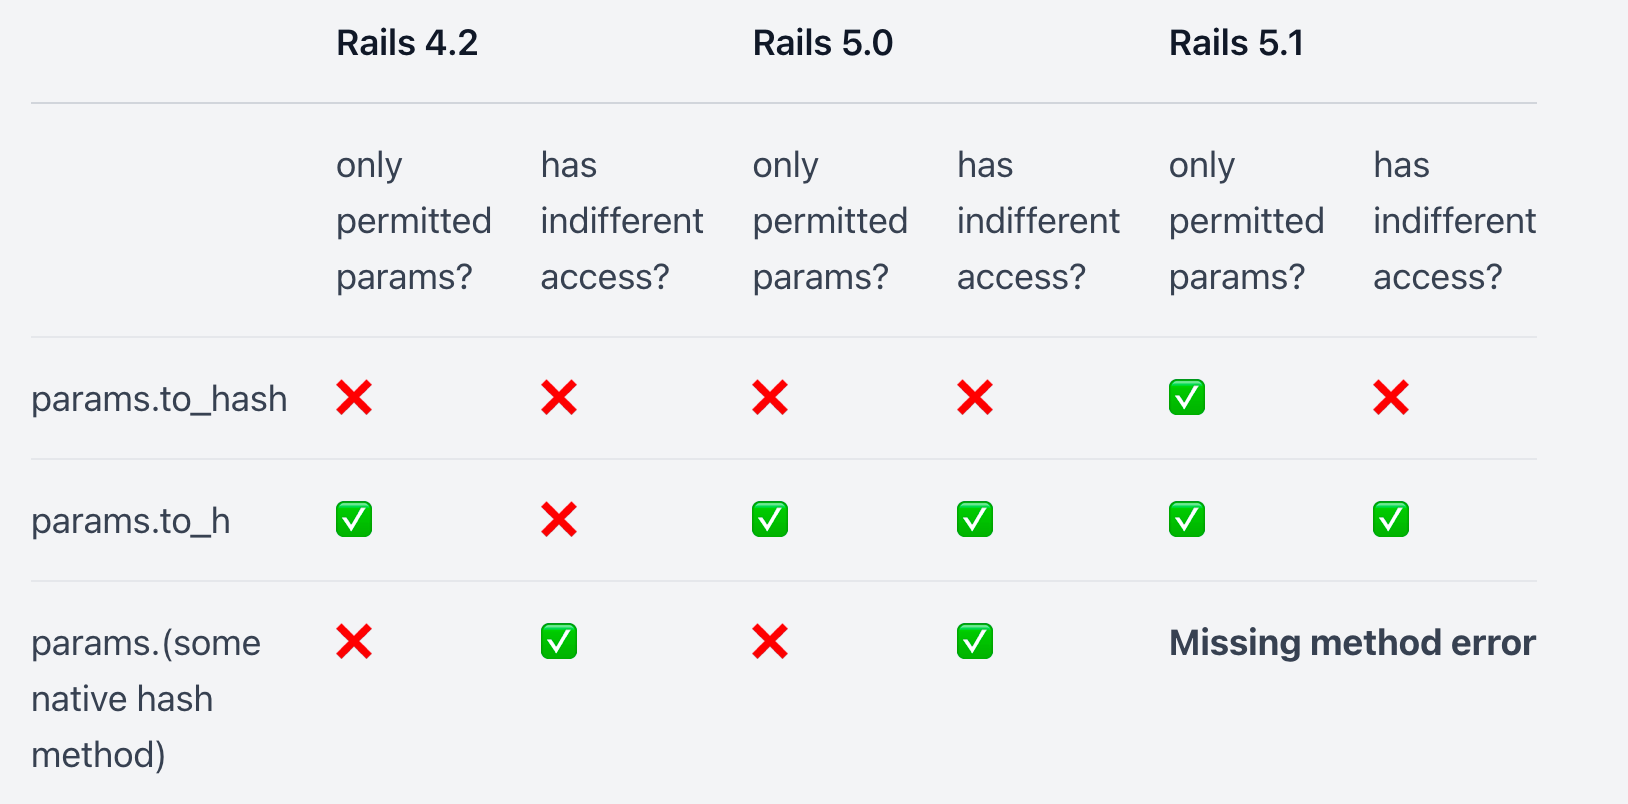 params.to_hash params.to_h and other native hash methods in Rails 4.2 to Rails 5.1